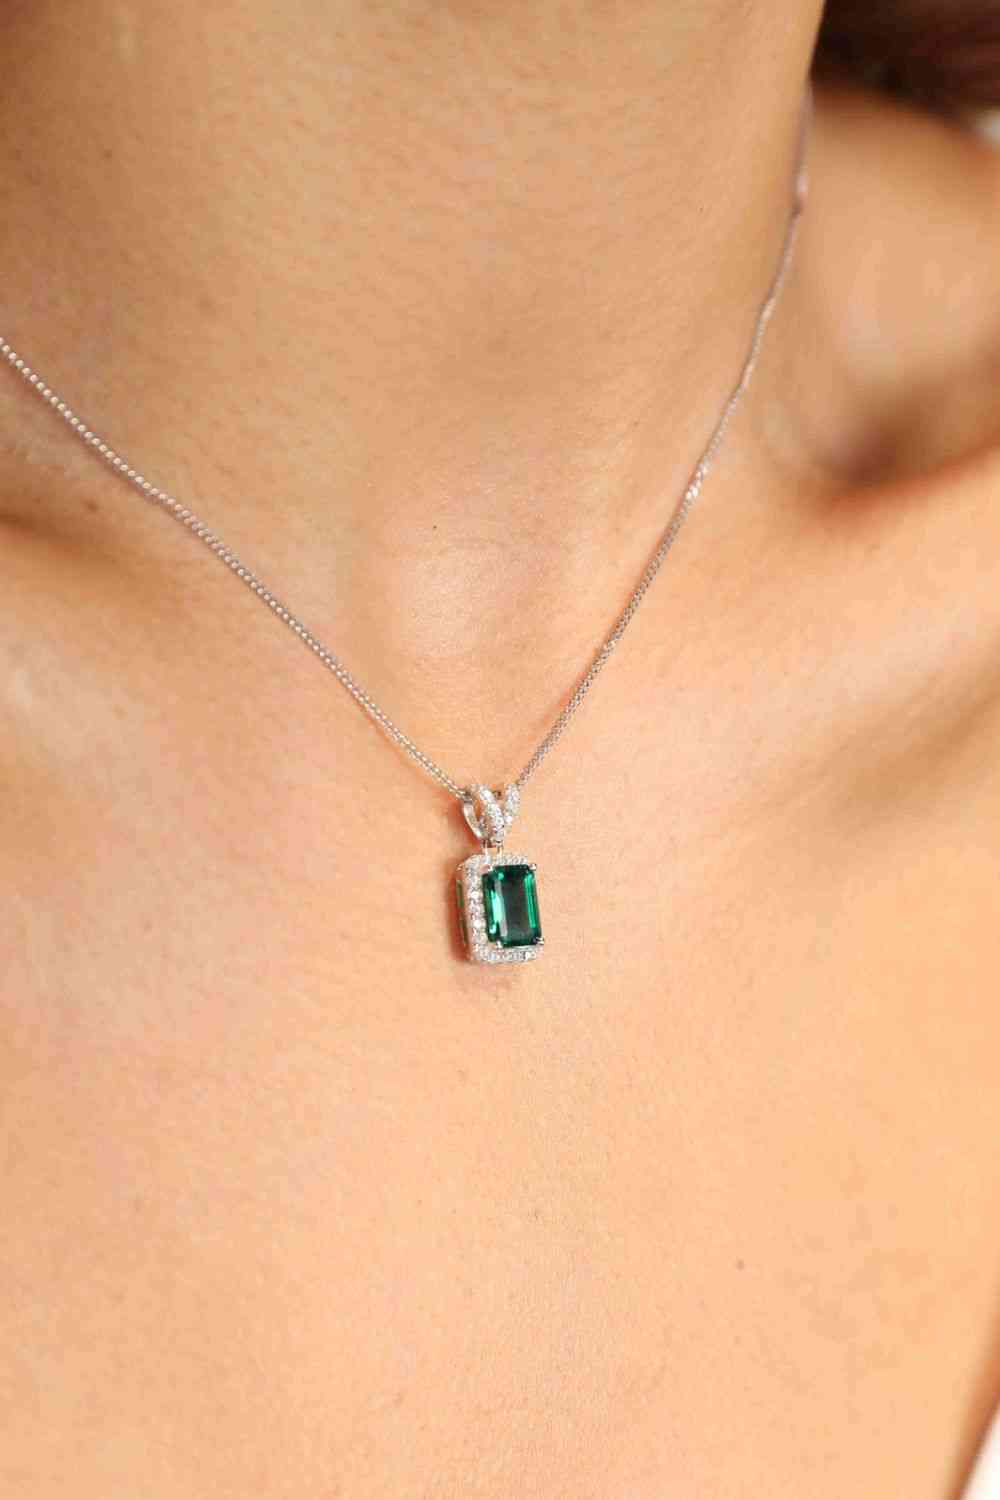 Adored 1.25 Carat Lab-Grown Emerald Pendant Necklace Green One Size